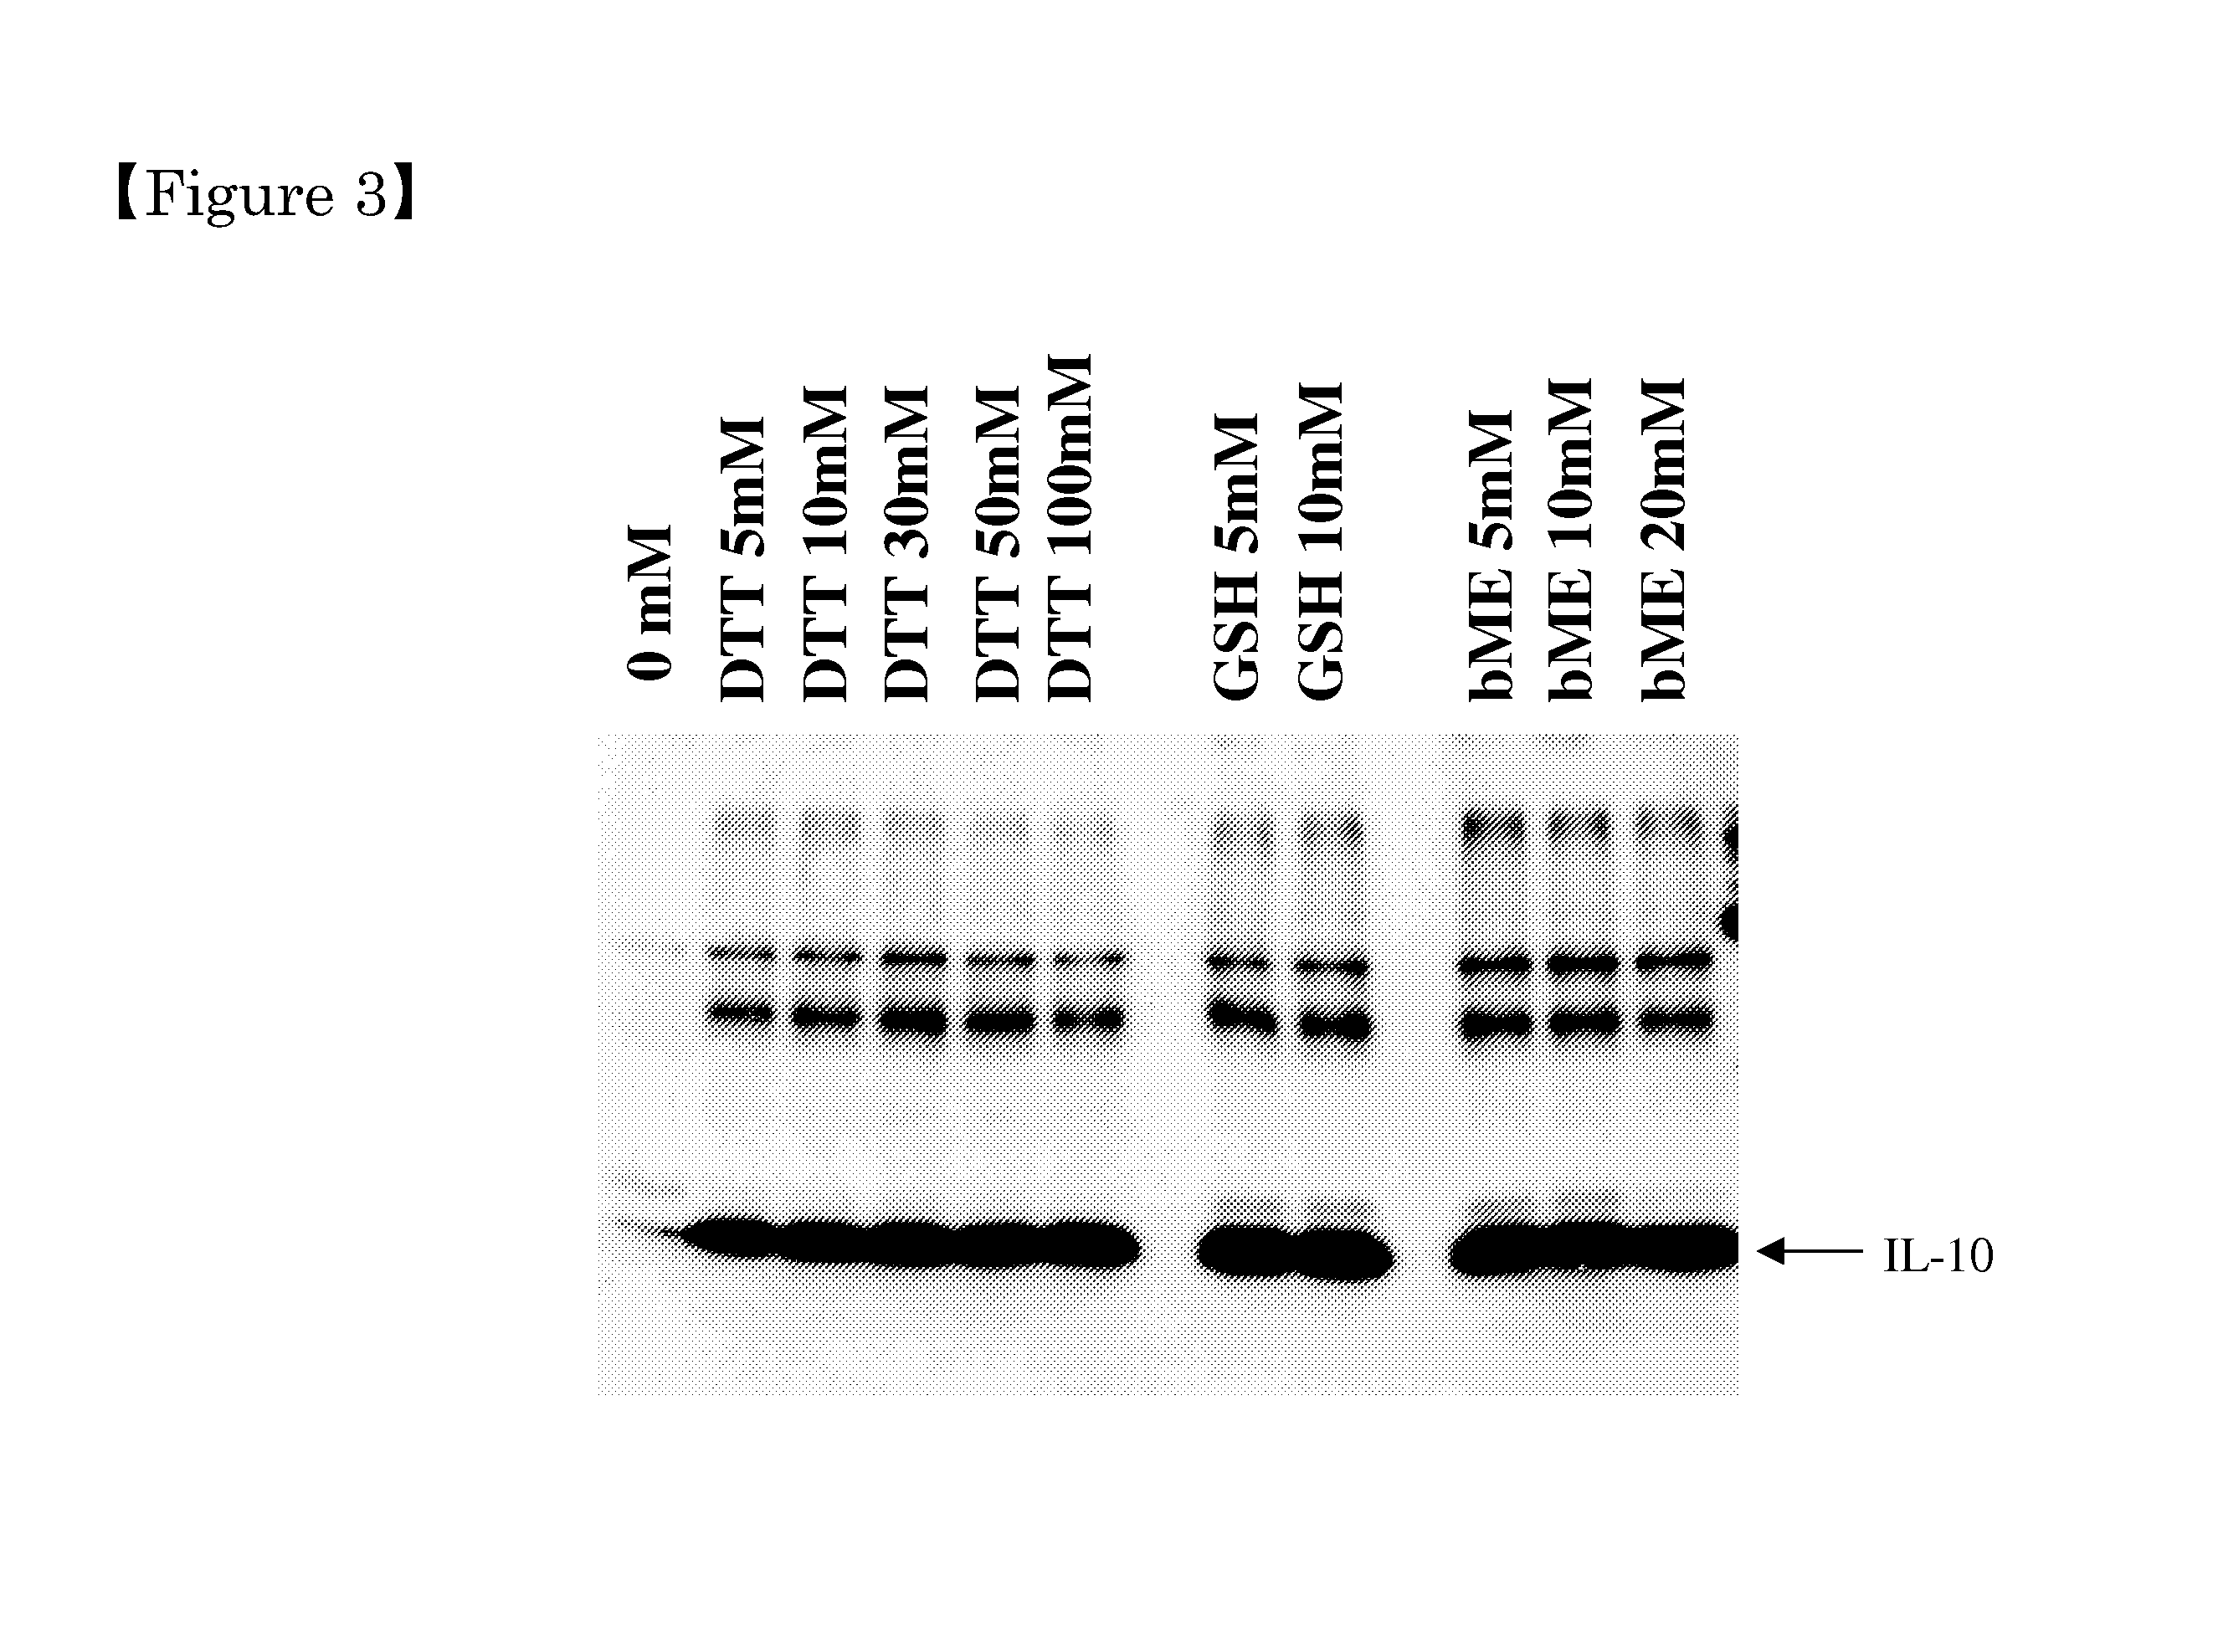 Method for extraction and purification of recombinant proteins from transgenic plants